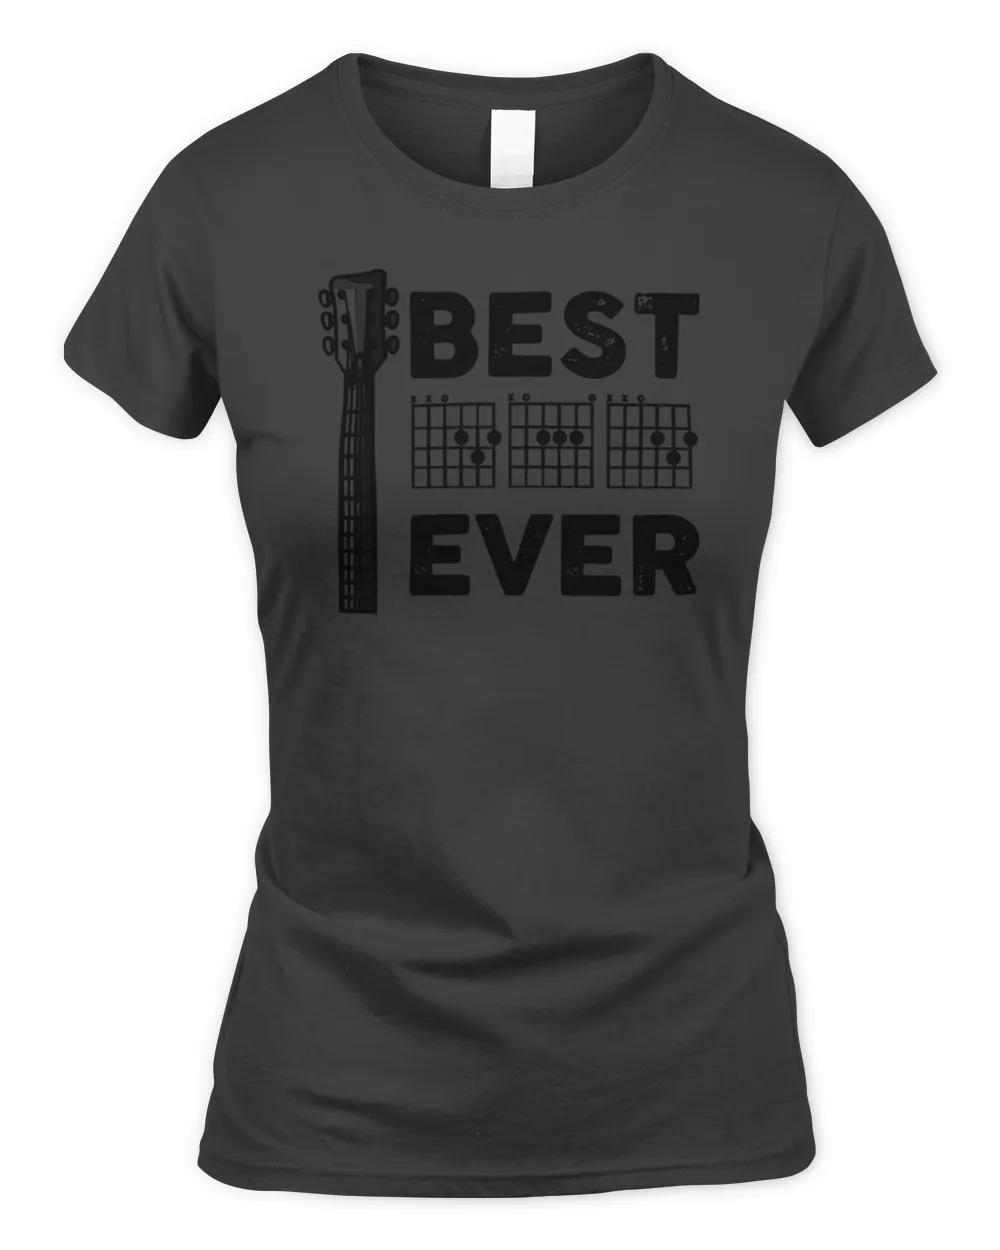 Father Best Dad Ever Guitar Chords Musician s 538 dad